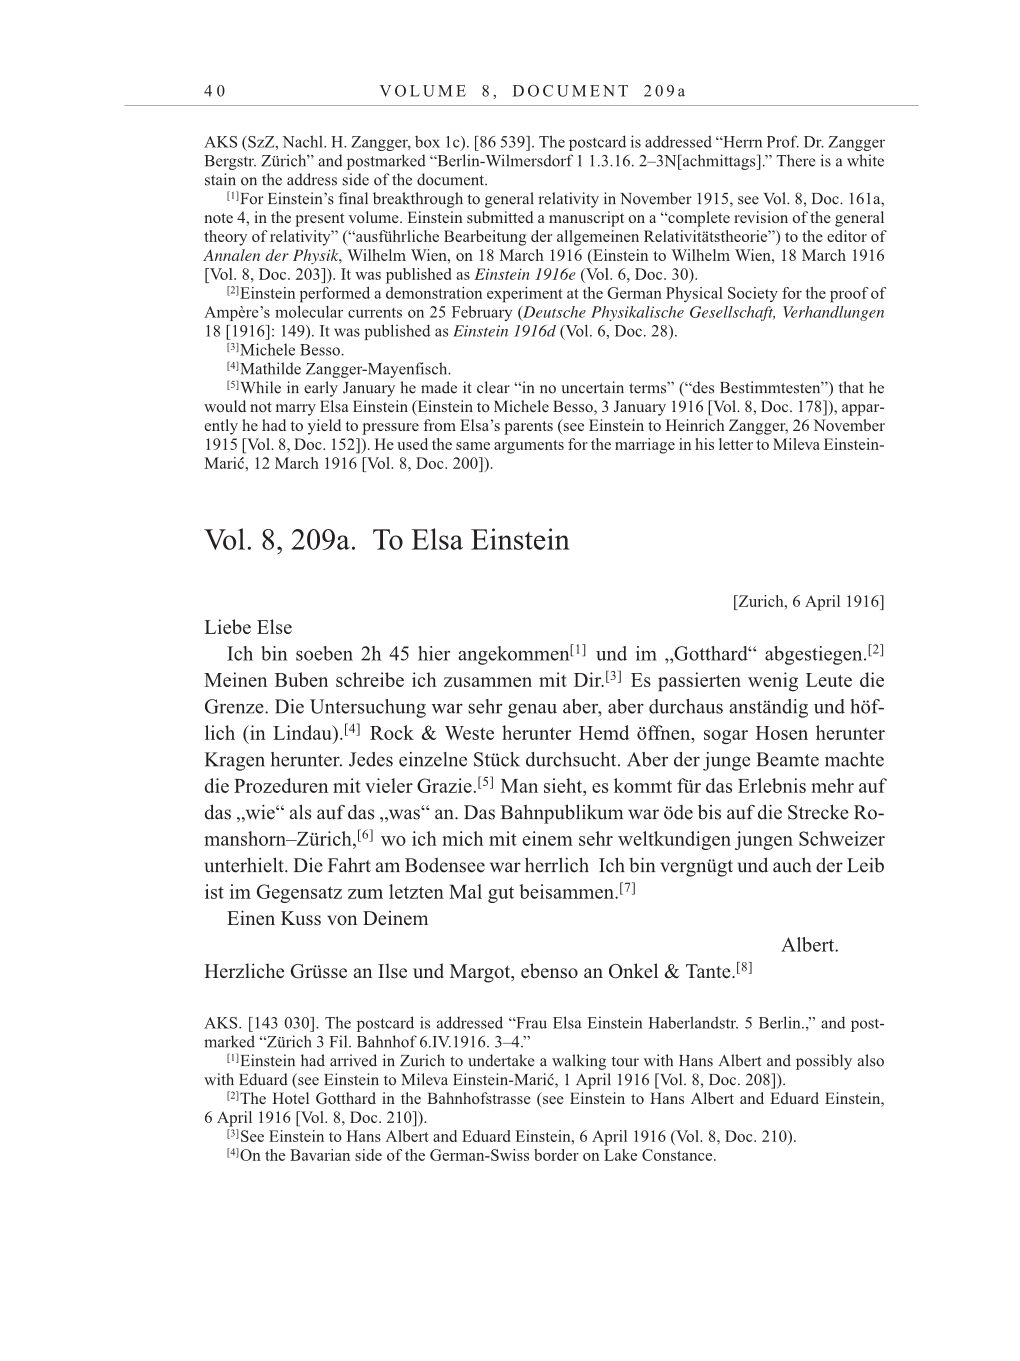 Volume 10: The Berlin Years: Correspondence May-December 1920 / Supplementary Correspondence 1909-1920 page 40